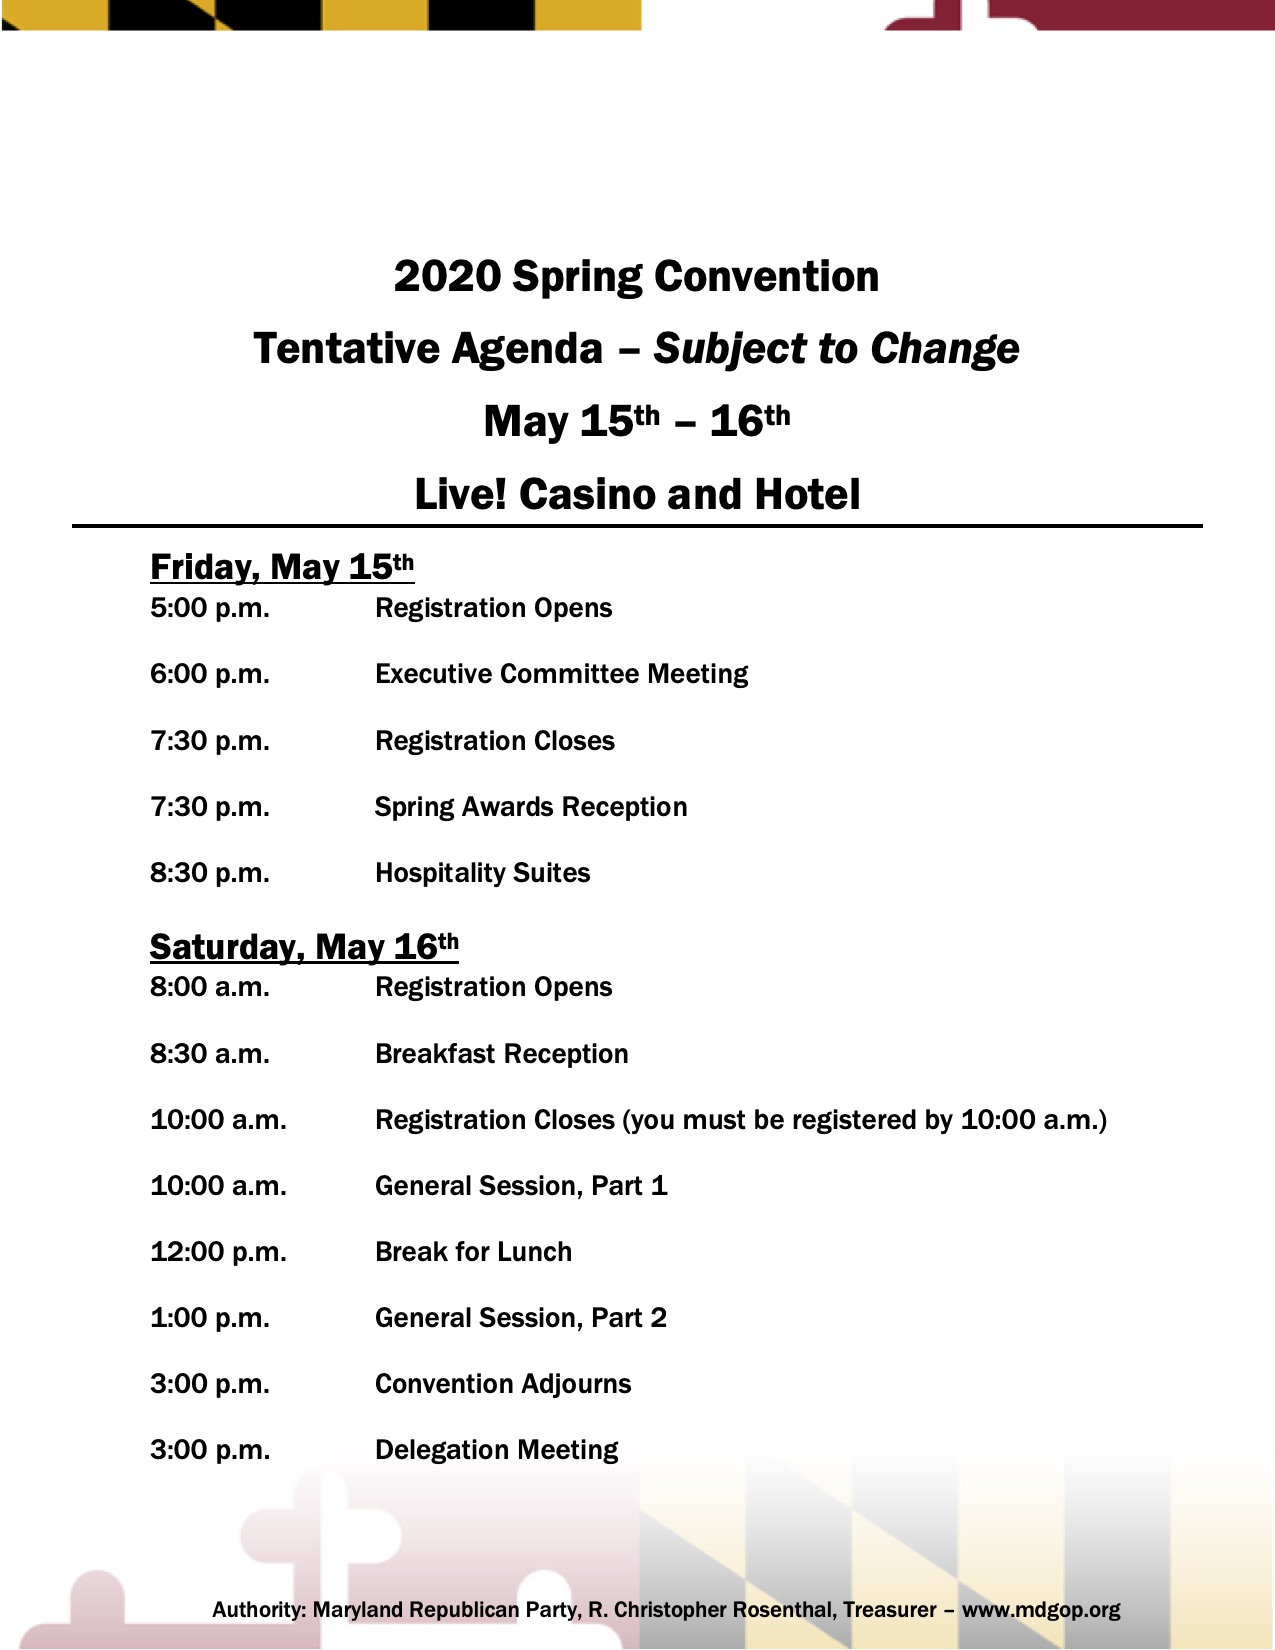 2020 Spring Convention Packet pg4